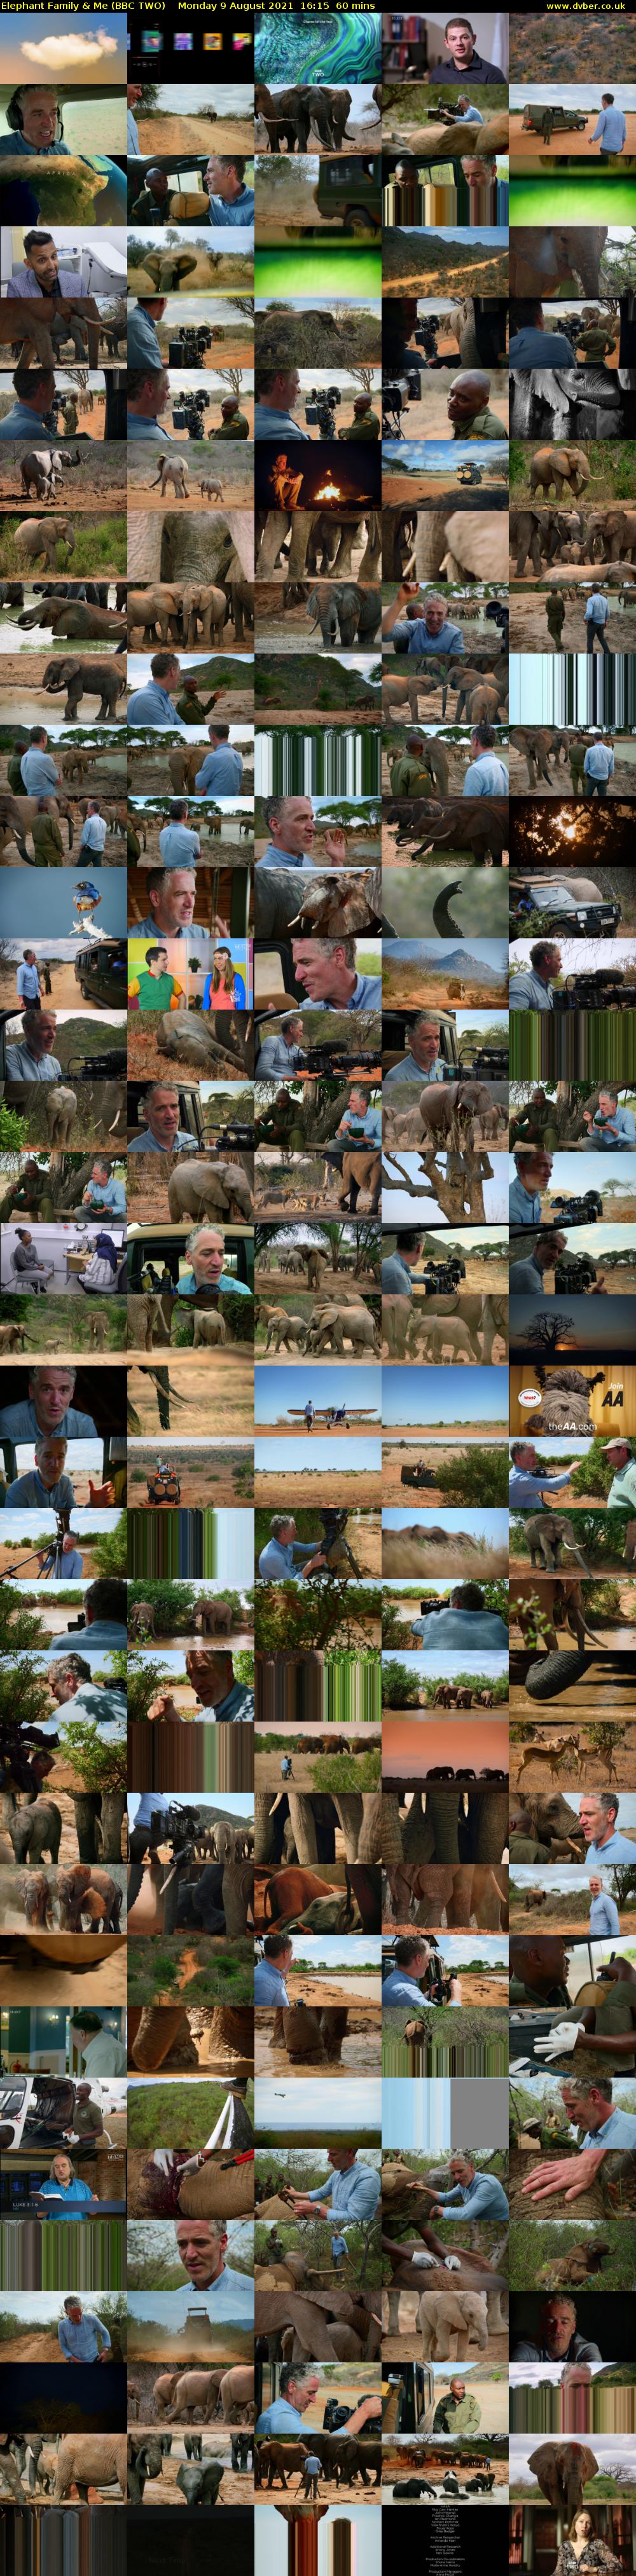 Elephant Family & Me (BBC TWO) Monday 9 August 2021 16:15 - 17:15